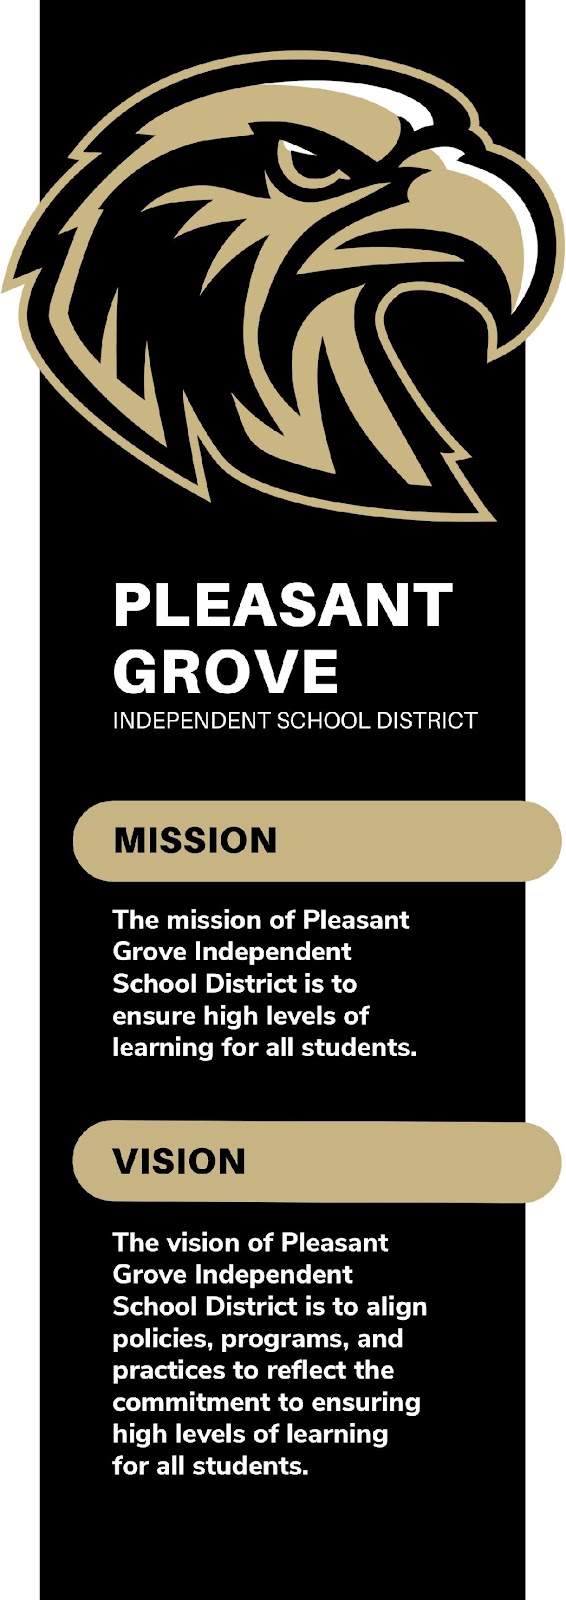 MISSION: The mission of Pleasant Grove Independent School District is to ensure high levels of learning for all students.   VISION: The vision of Pleasant Grove Independent School Districts is to align policies, programs, and practices to reflect the commitment to ensuring high levels of learning for all students. 